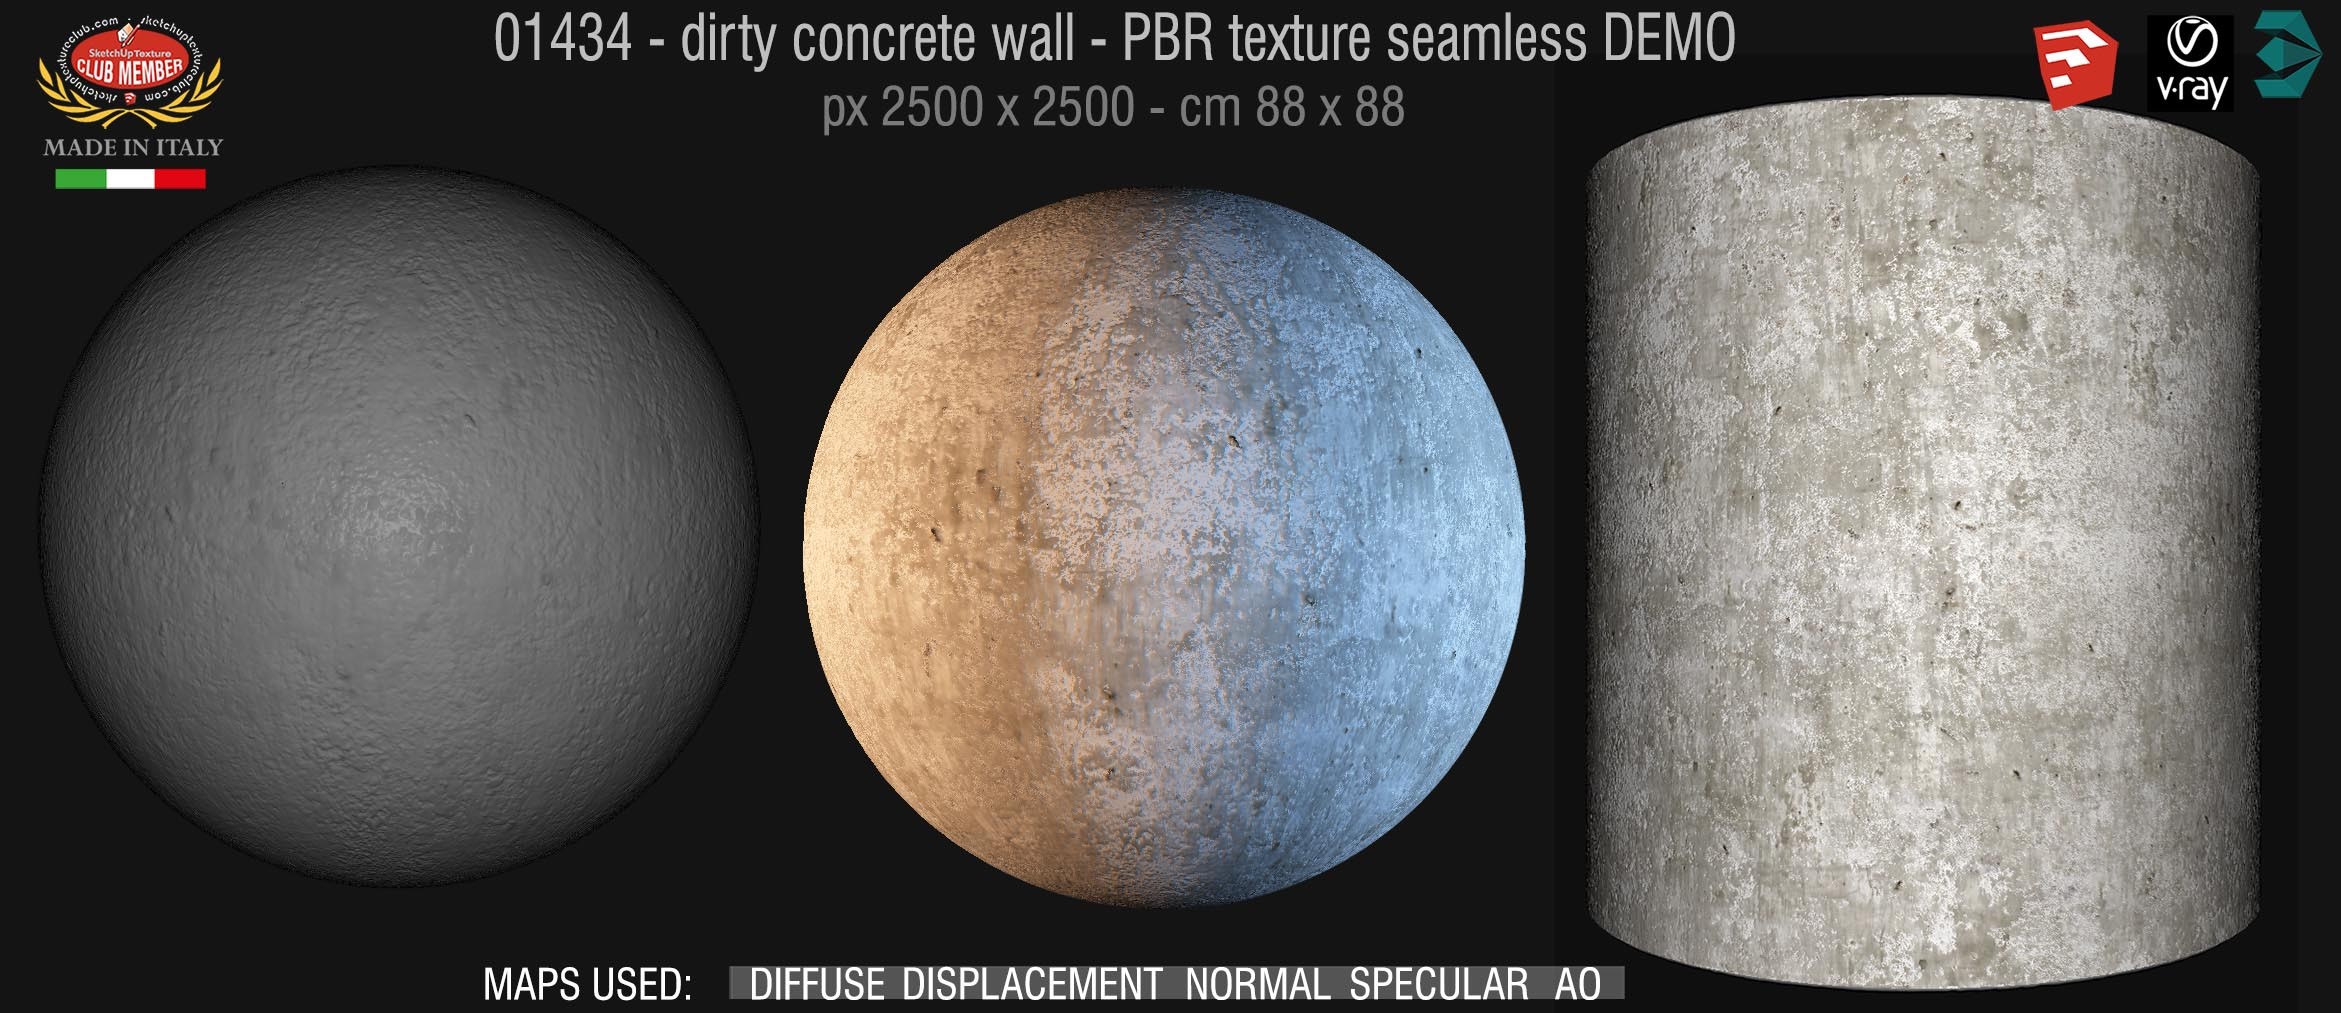 01434 Concrete bare dirty wall PBR texture seamless DEMO